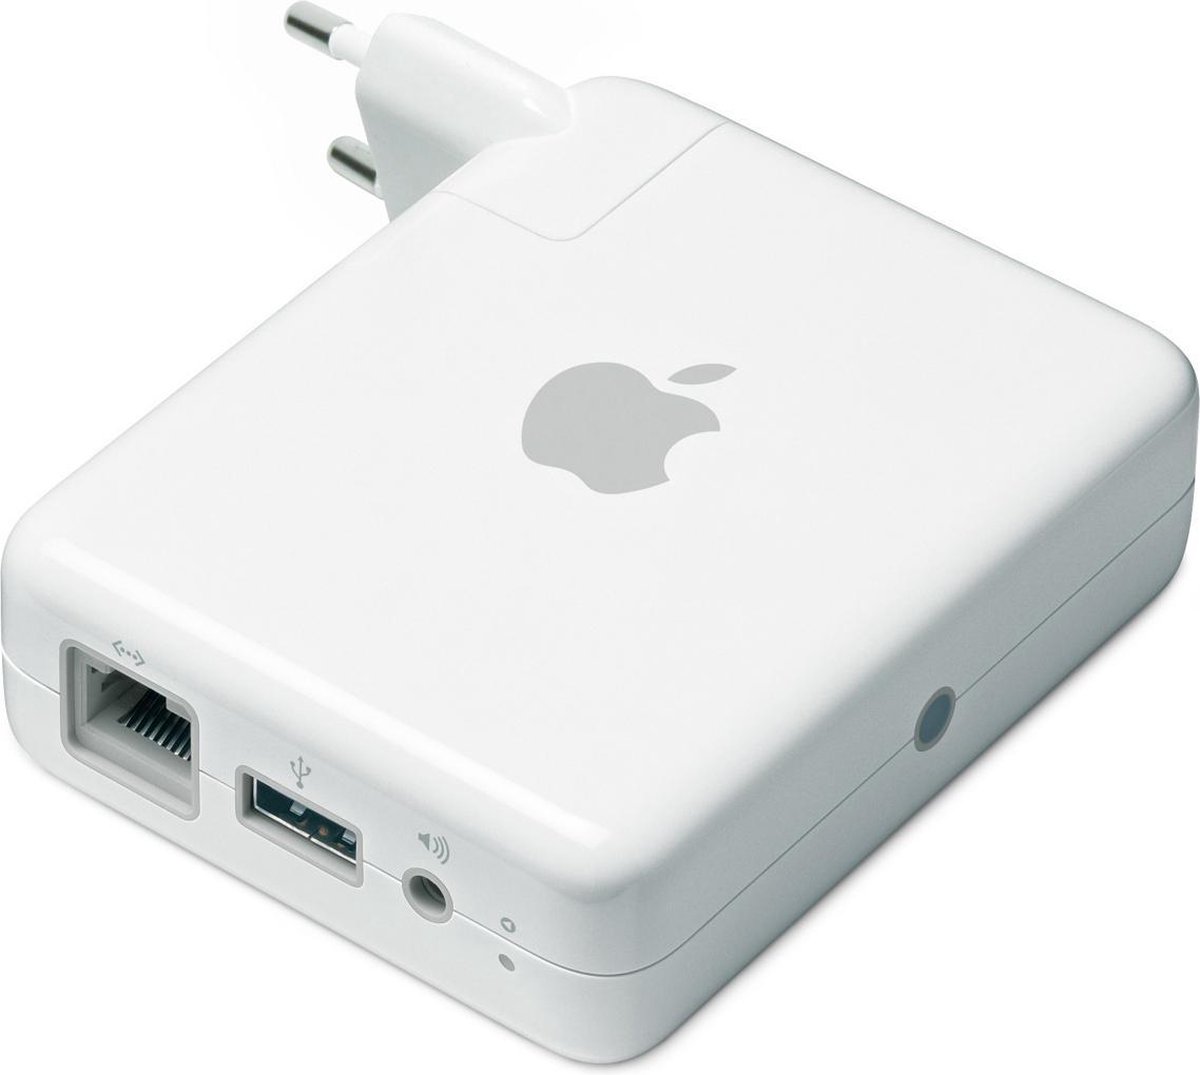 apple support airport express setup